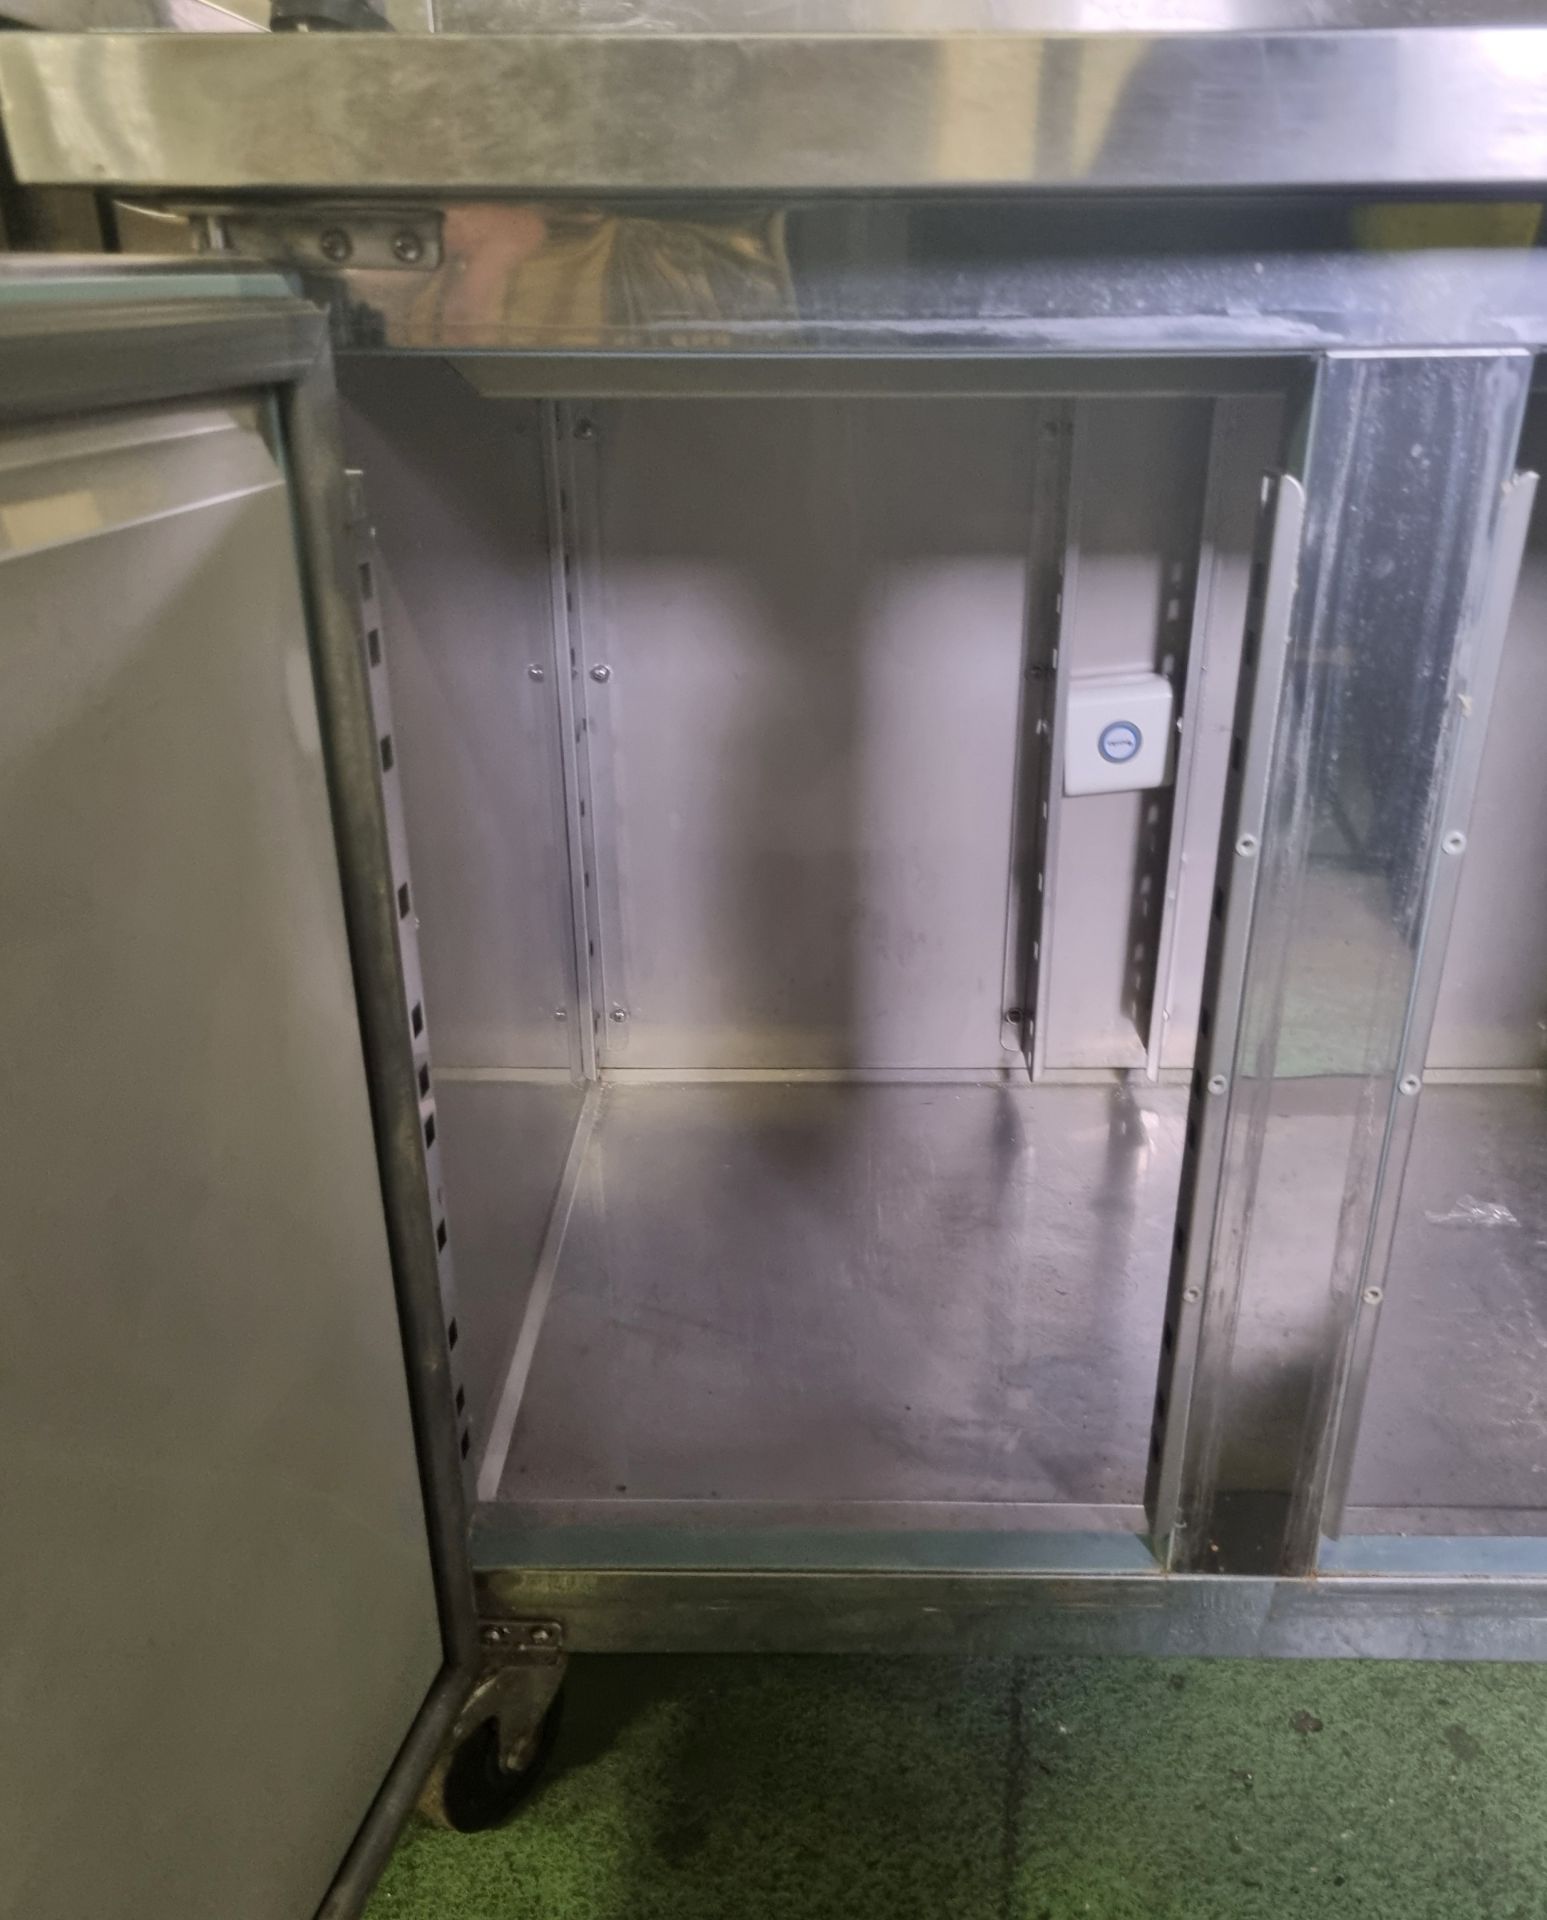 Project Distribution ABGN2100BT stainless steel 2 door counter fridge - W 1360 x D 700 x H 850mm - Image 5 of 6